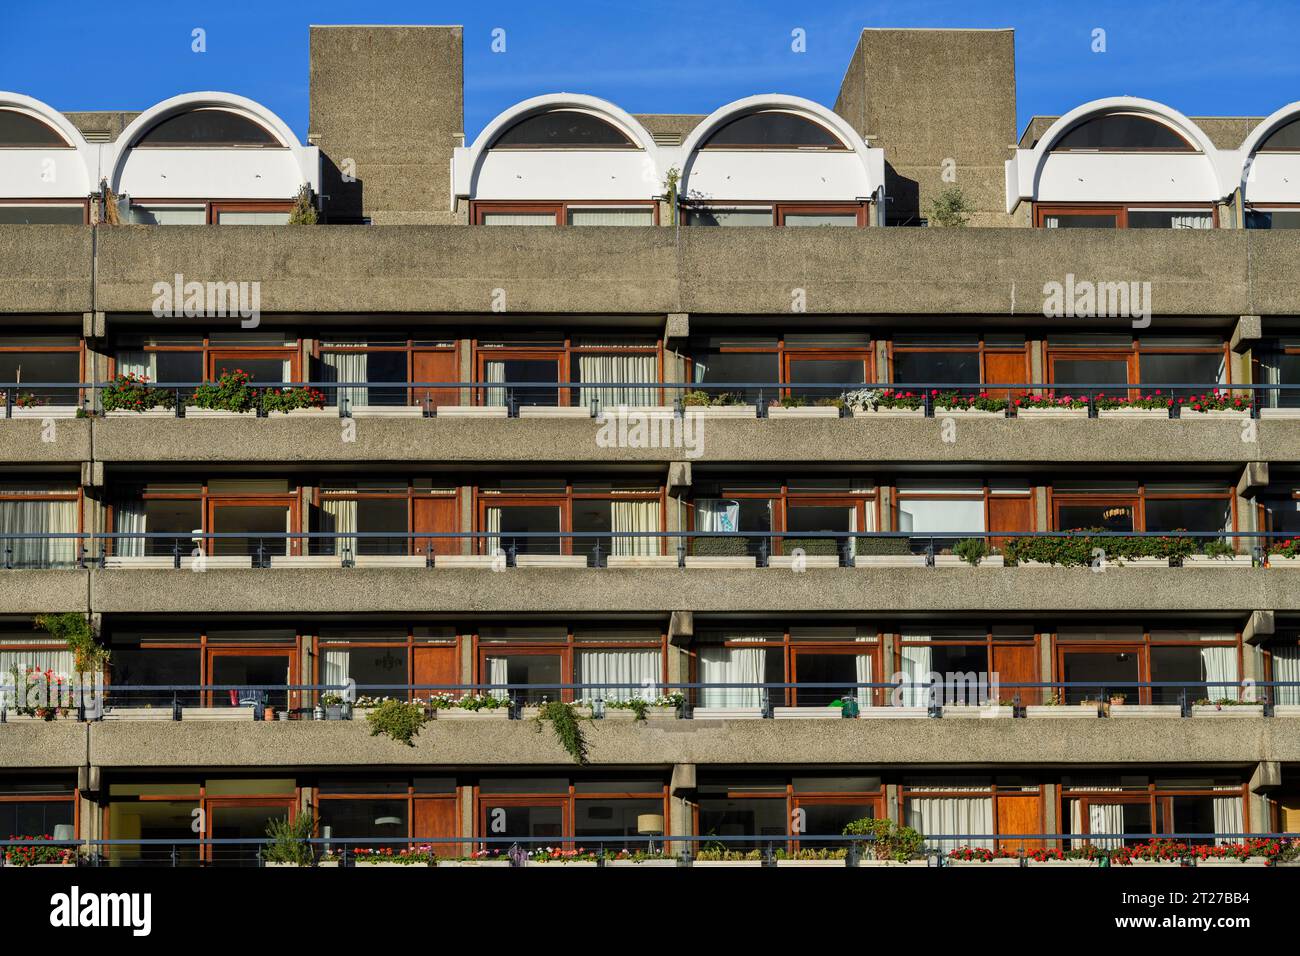 Andrewes House, a terrace apartment block in the Barbican Estate, was designed by Chamberlin, Powell, and Bon, and is a prominent example of British b Stock Photo